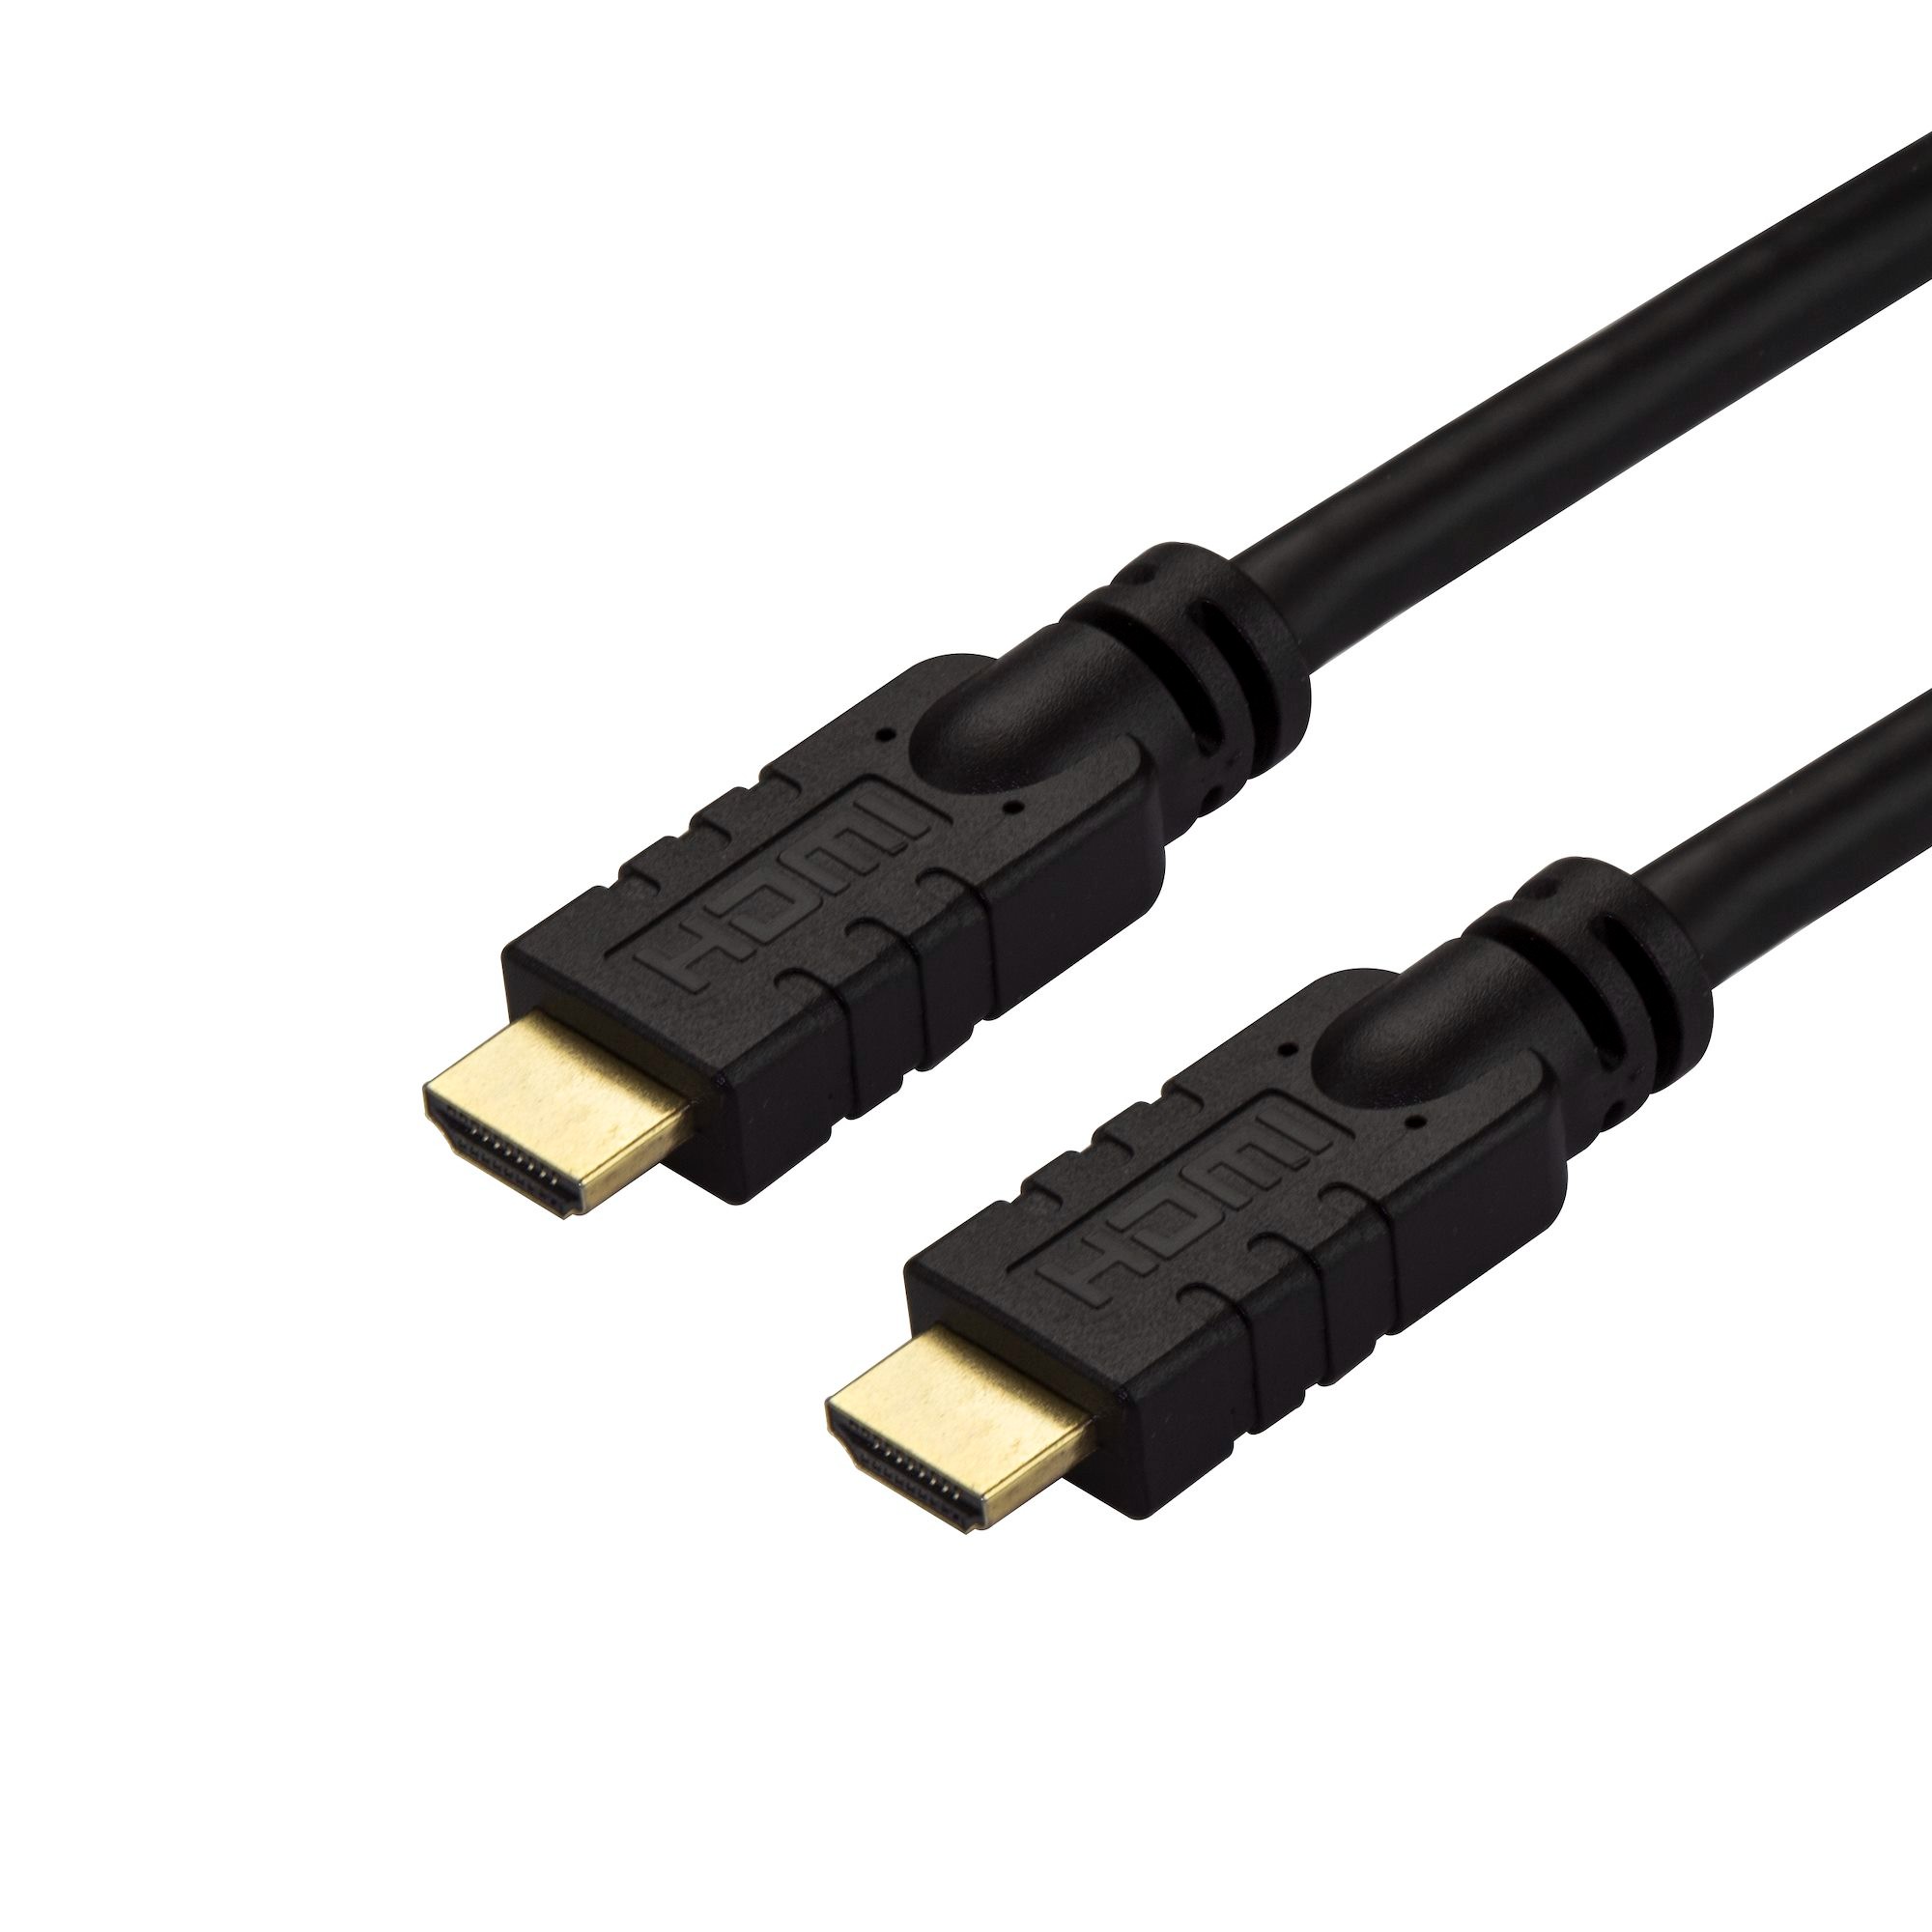 66ft (20m) Active HDMI Cable - 4K High Speed HDMI Cable with Ethernet - CL2  Rated for In-Wall Install - 4K 30Hz Video - HDMI 1.4 Cord - For HDMI